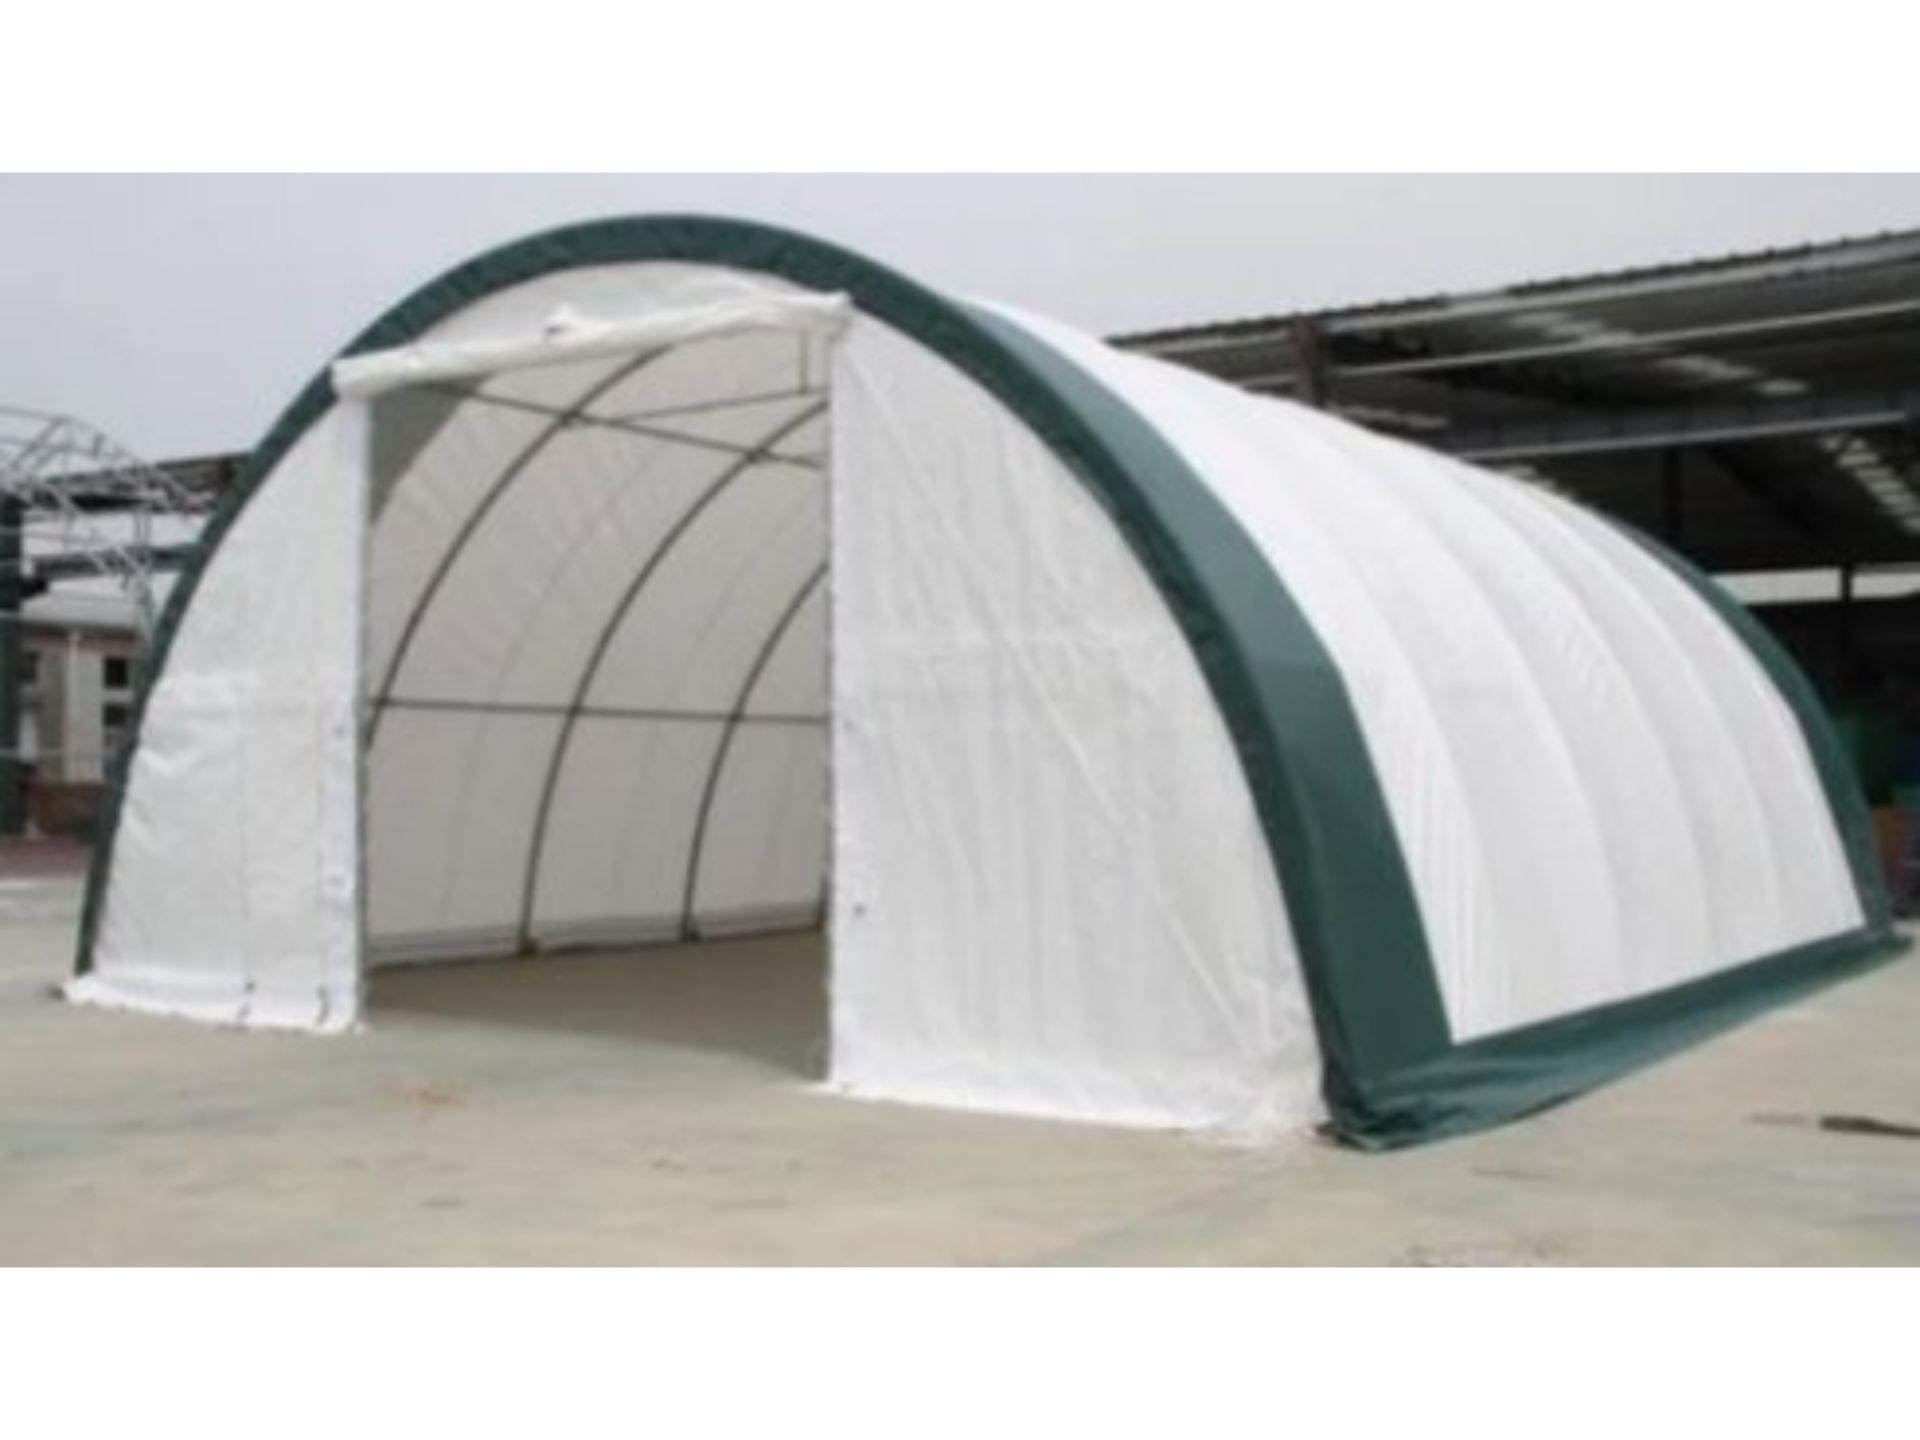 30' x 40' x 15 Dome Shelter - Image 3 of 8